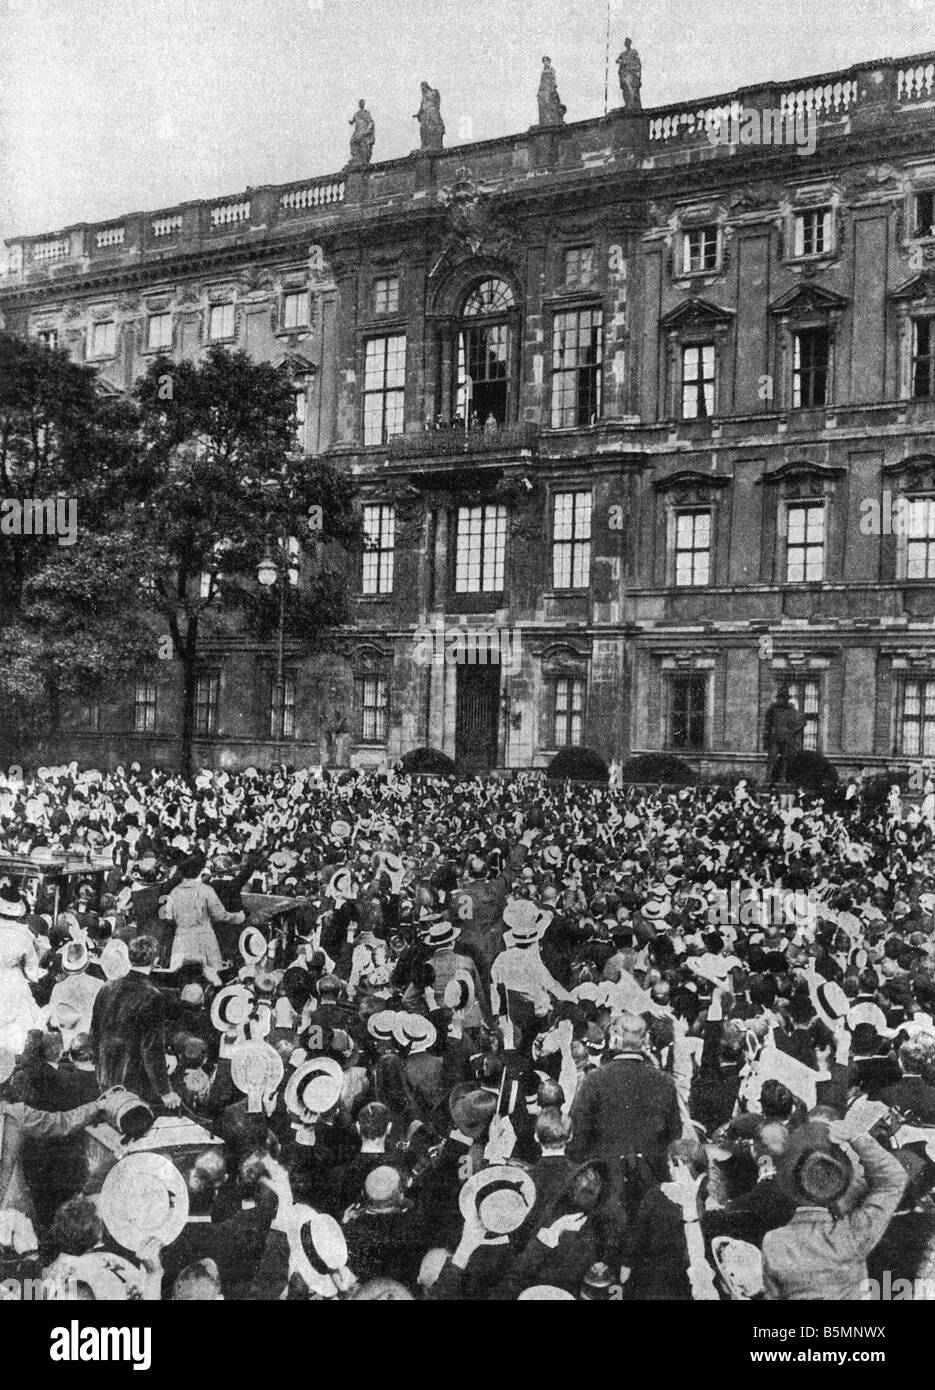 8 1914 8 1 A3 5 Kaiser s speech Berlin 1914 World War I 1914 18 Berlin The outbreak of war and mobilisation of troops on 1 Augus Stock Photo